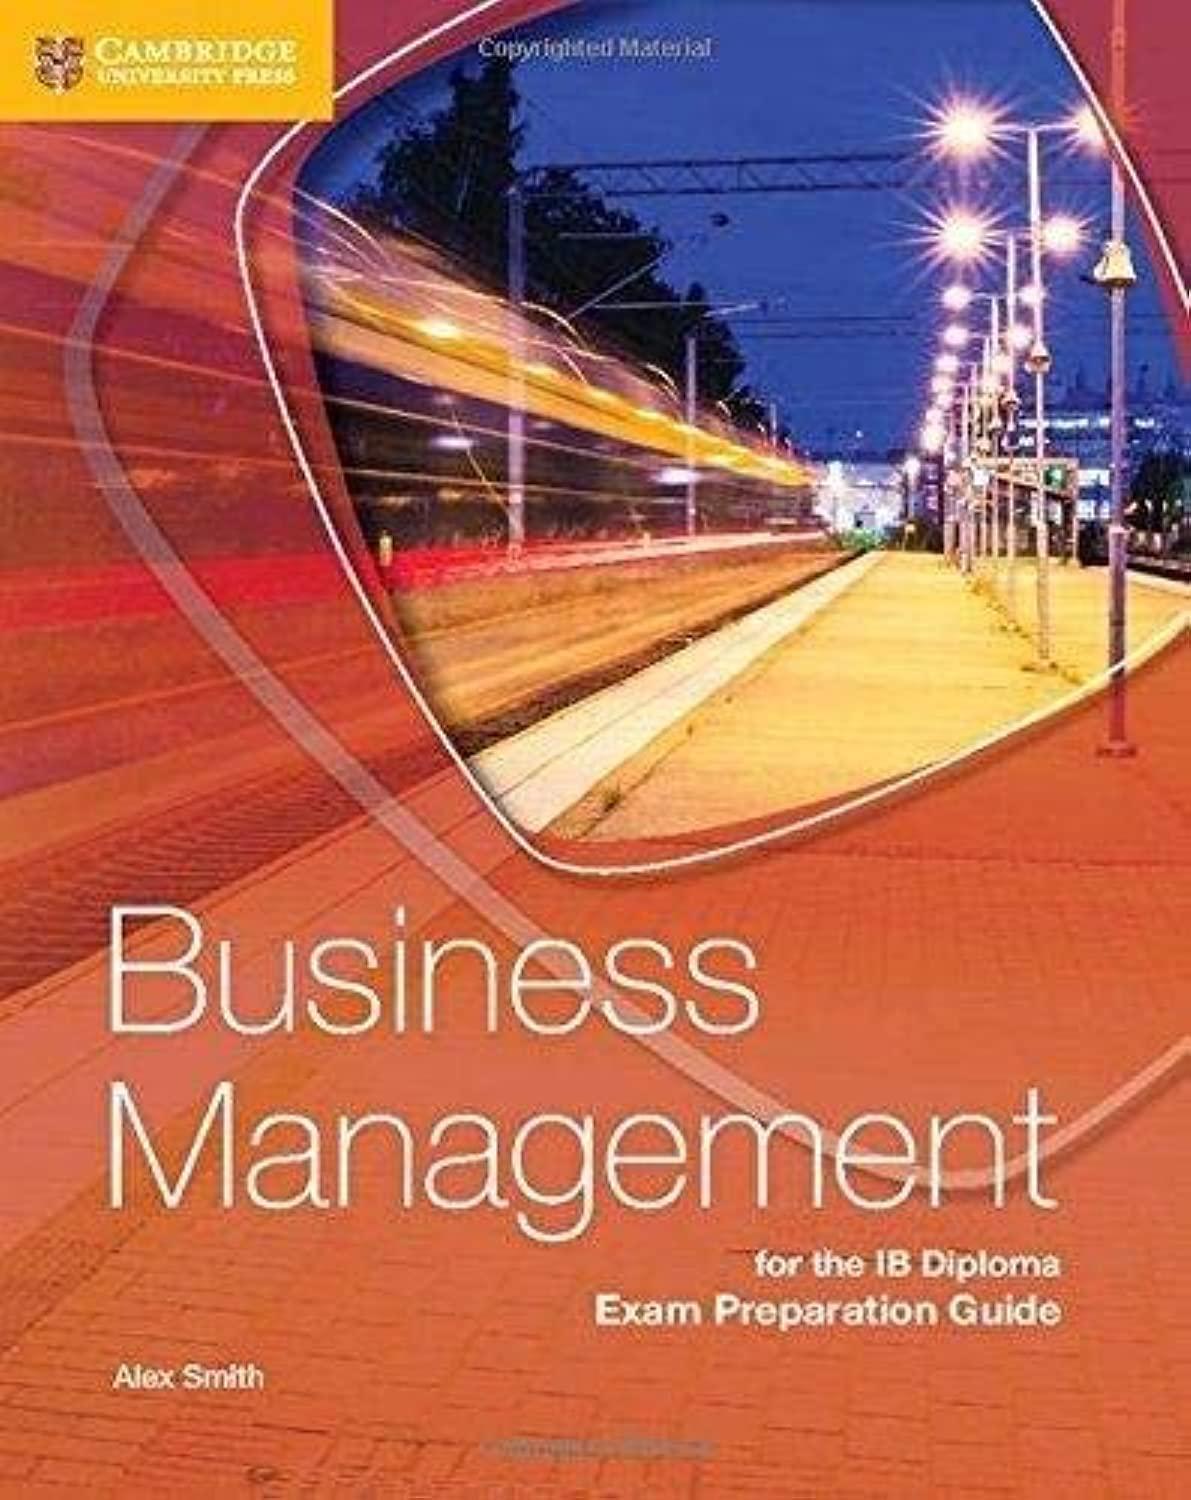 Business Management For The IB Diploma Exam Preparation Guide